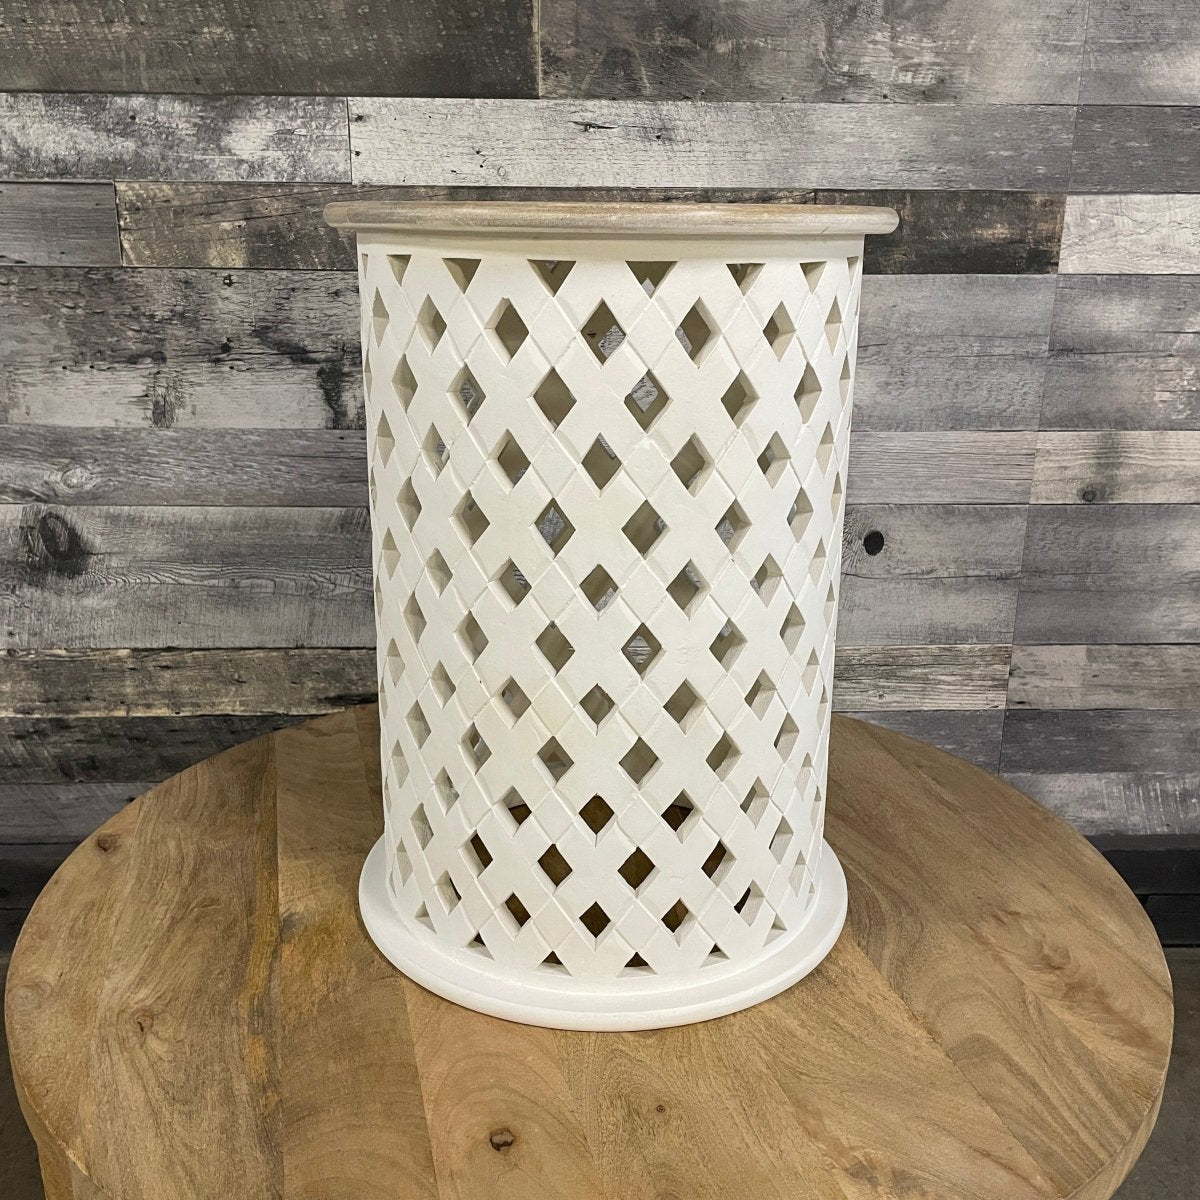 Montauk White mango wood round end table - Rustic Furniture Outlet